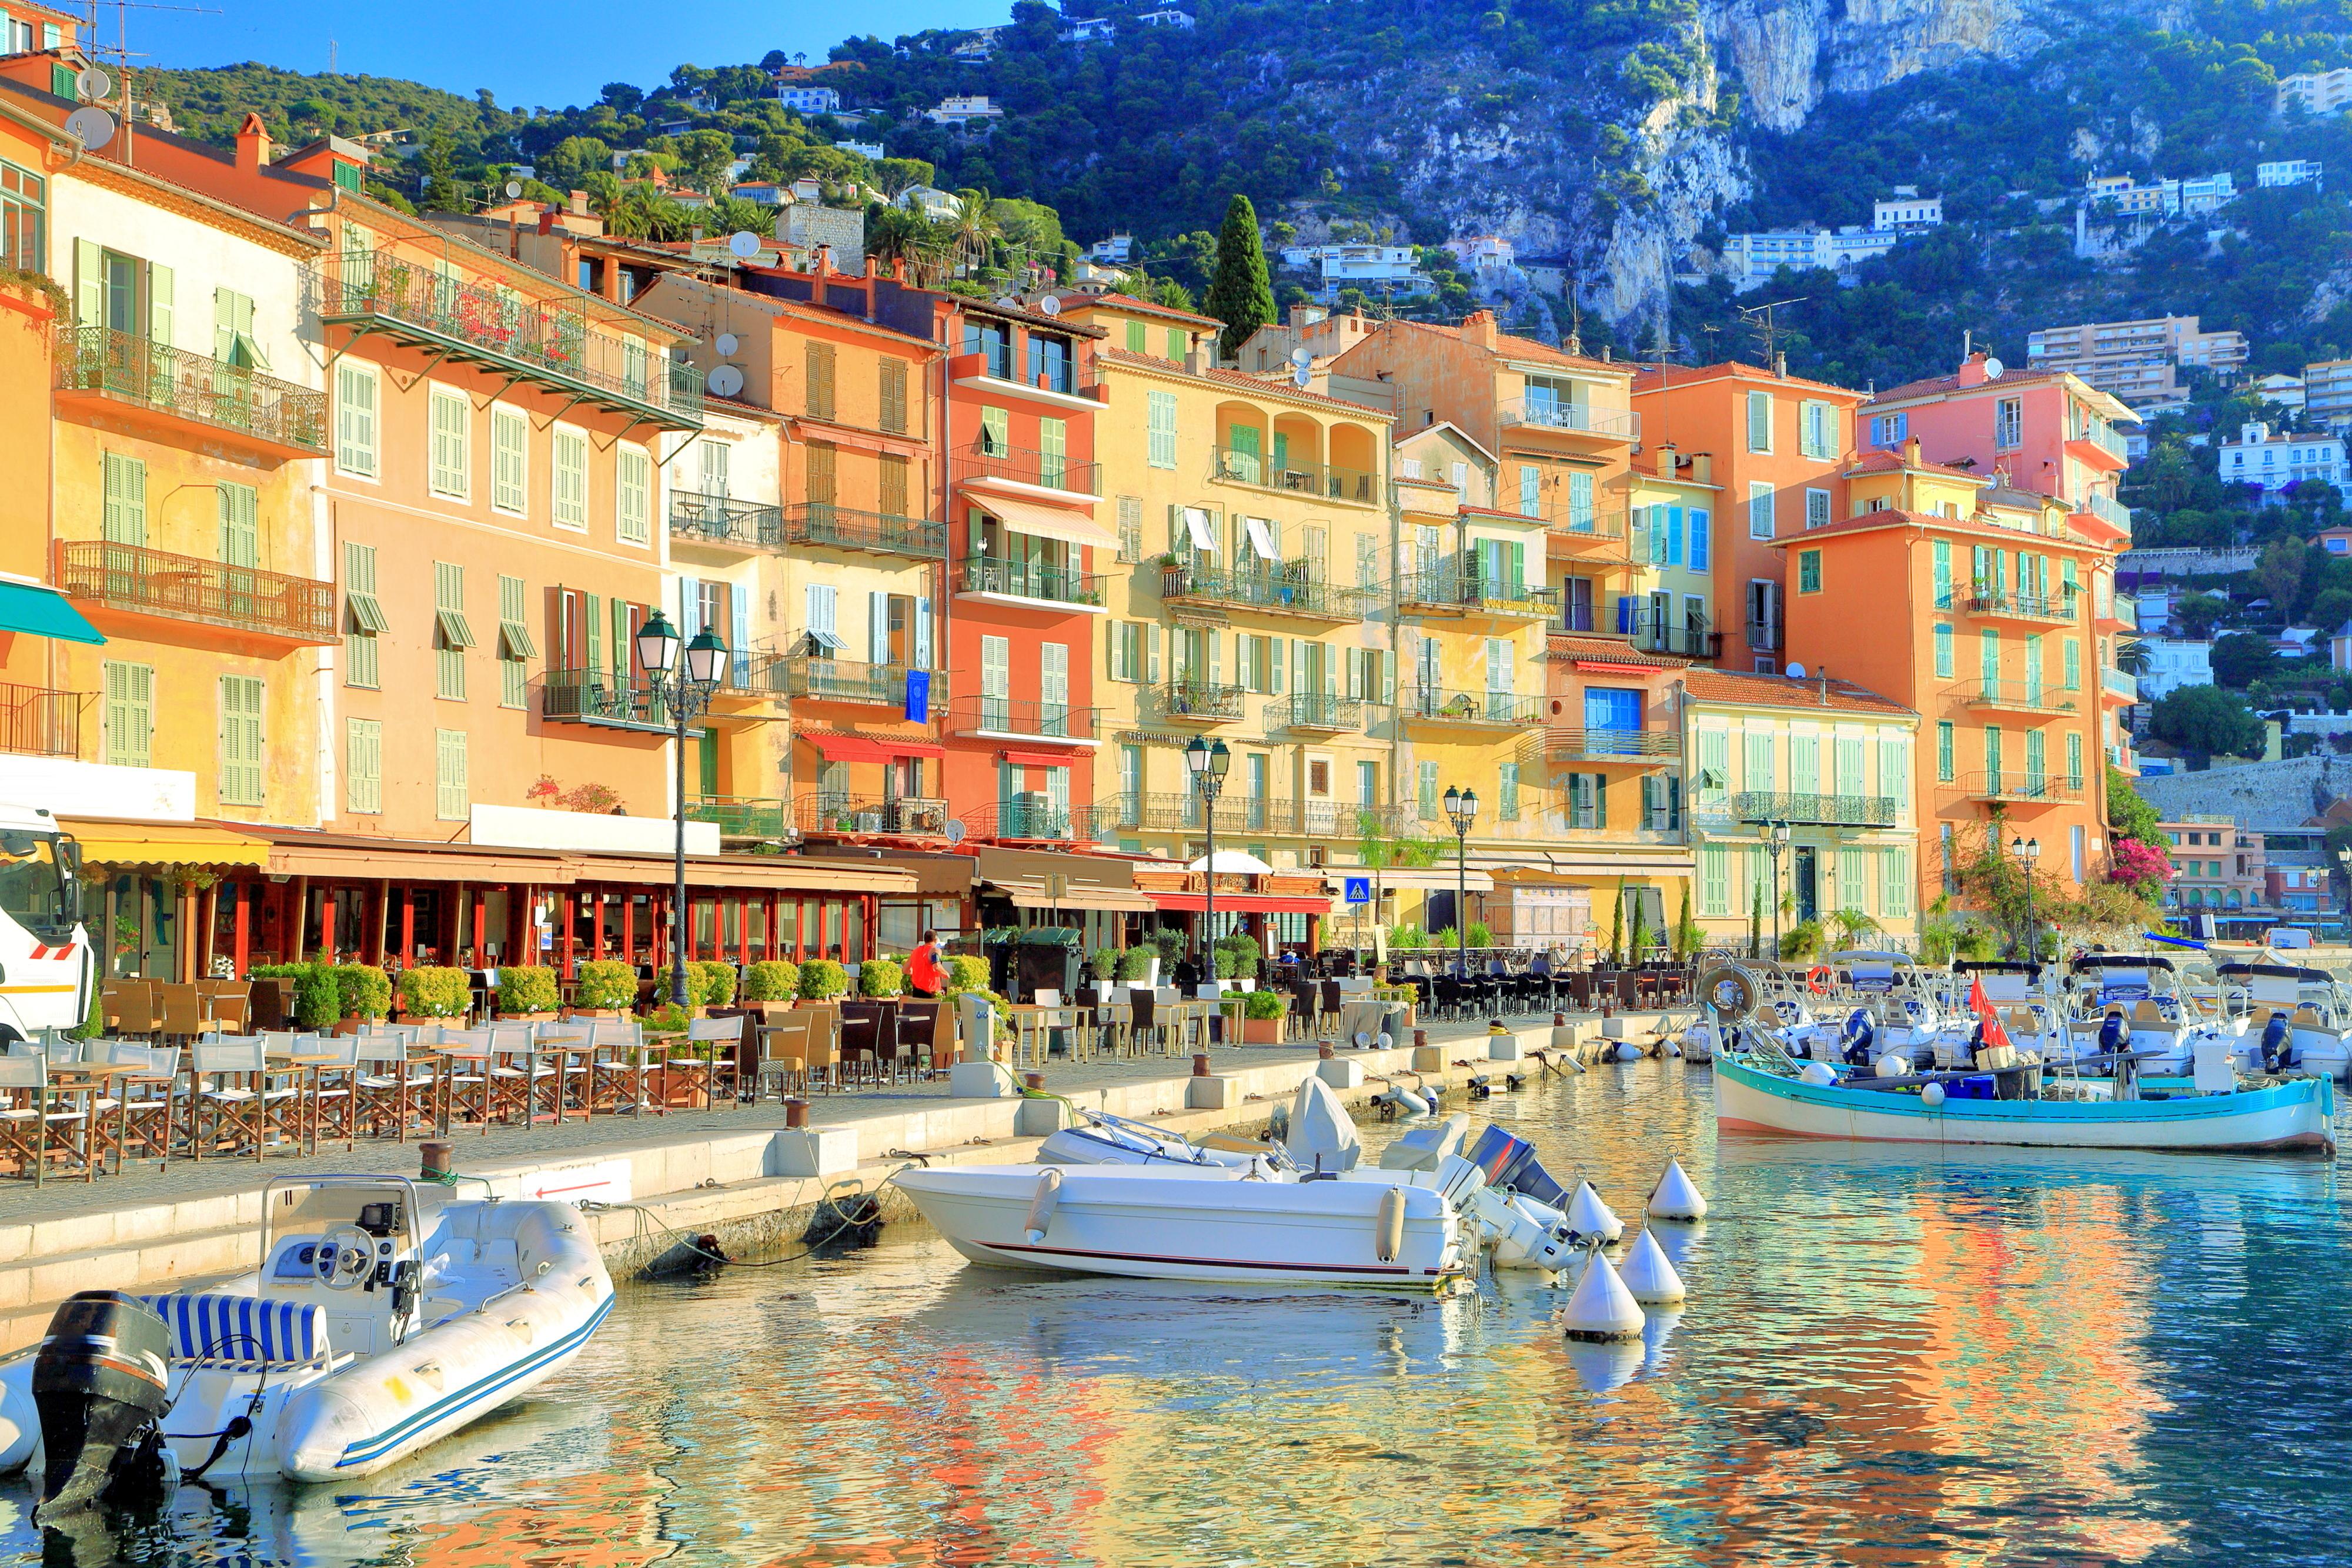 Latest travel itineraries for Villefranche-sur-Mer in September (updated in 2023), Villefranche-sur-Mer reviews, Villefranche-sur-Mer address and opening hours, popular attractions, hotels, and restaurants near Villefranche-sur-Mer - Trip.com